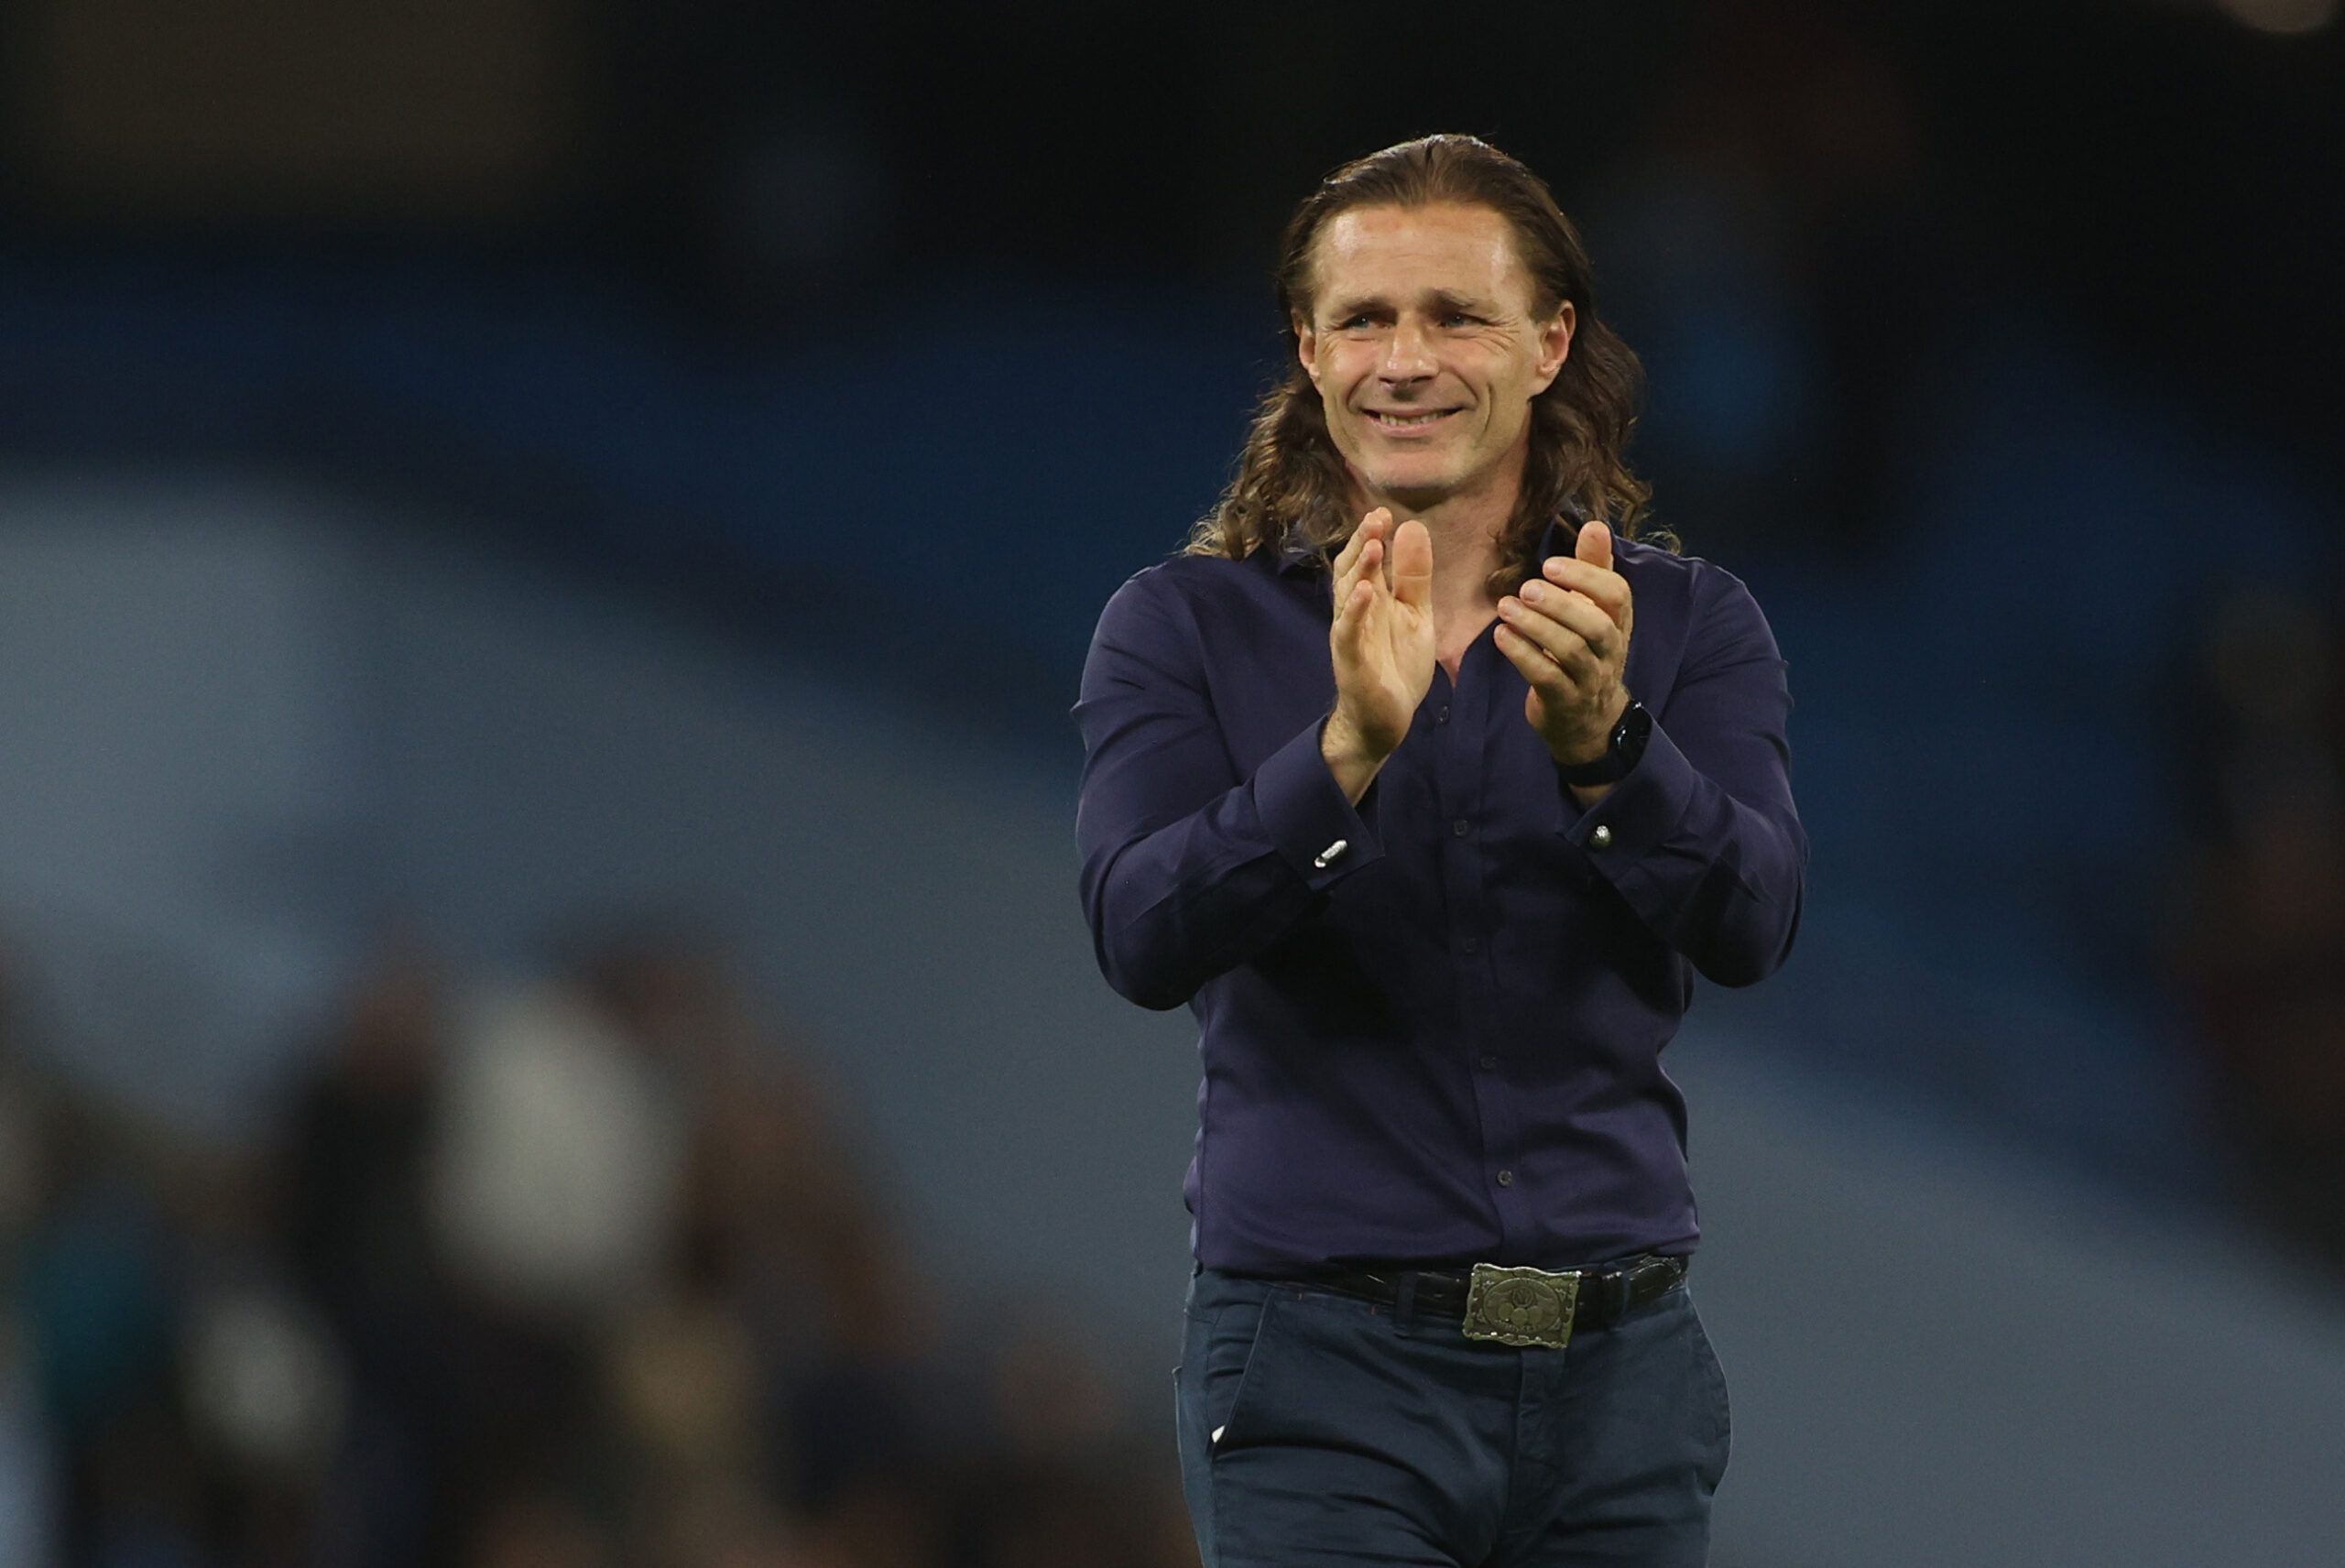 Soccer Football - Carabao Cup - Third Round - Manchester City v Wycombe Wanderers - Etihad Stadium, Manchester, Britain - September 21, 2021 Wycombe Wanderers manager Gareth Ainsworth applauds fans after the match Action Images via Reuters/Carl Recine EDITORIAL USE ONLY. No use with unauthorized audio, video, data, fixture lists, club/league logos or 'live' services. Online in-match use limited to 75 images, no video emulation. No use in betting, games or single club /league/player publications.